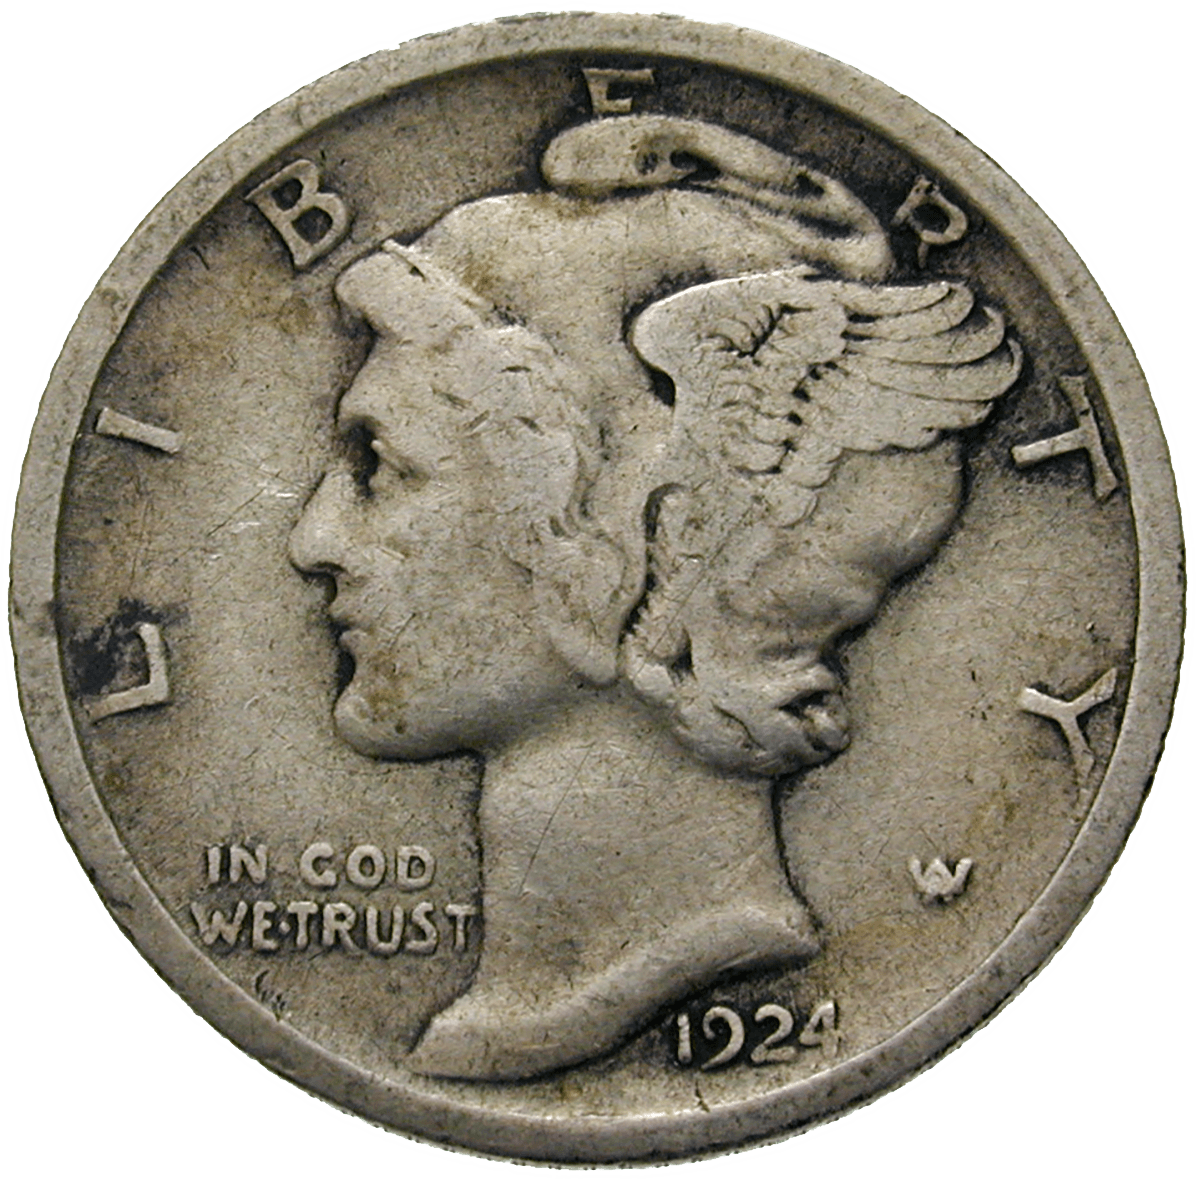 United States of America, 10 Cent 1924 (obverse)